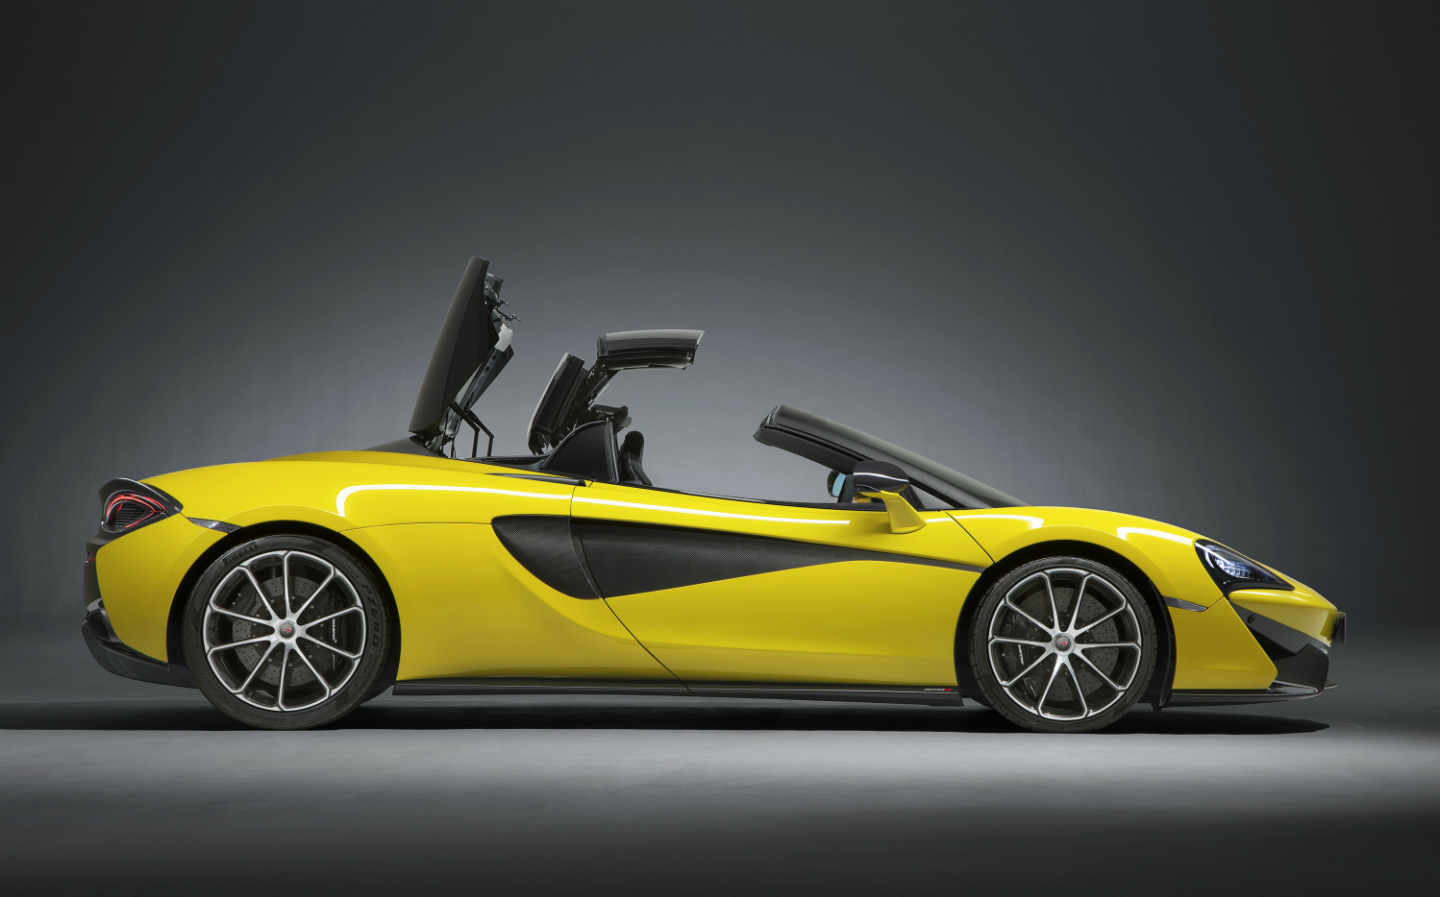 McLaren 570S Spider: Top 5 star new cars at the 2017 Goodwood Festival of Speed